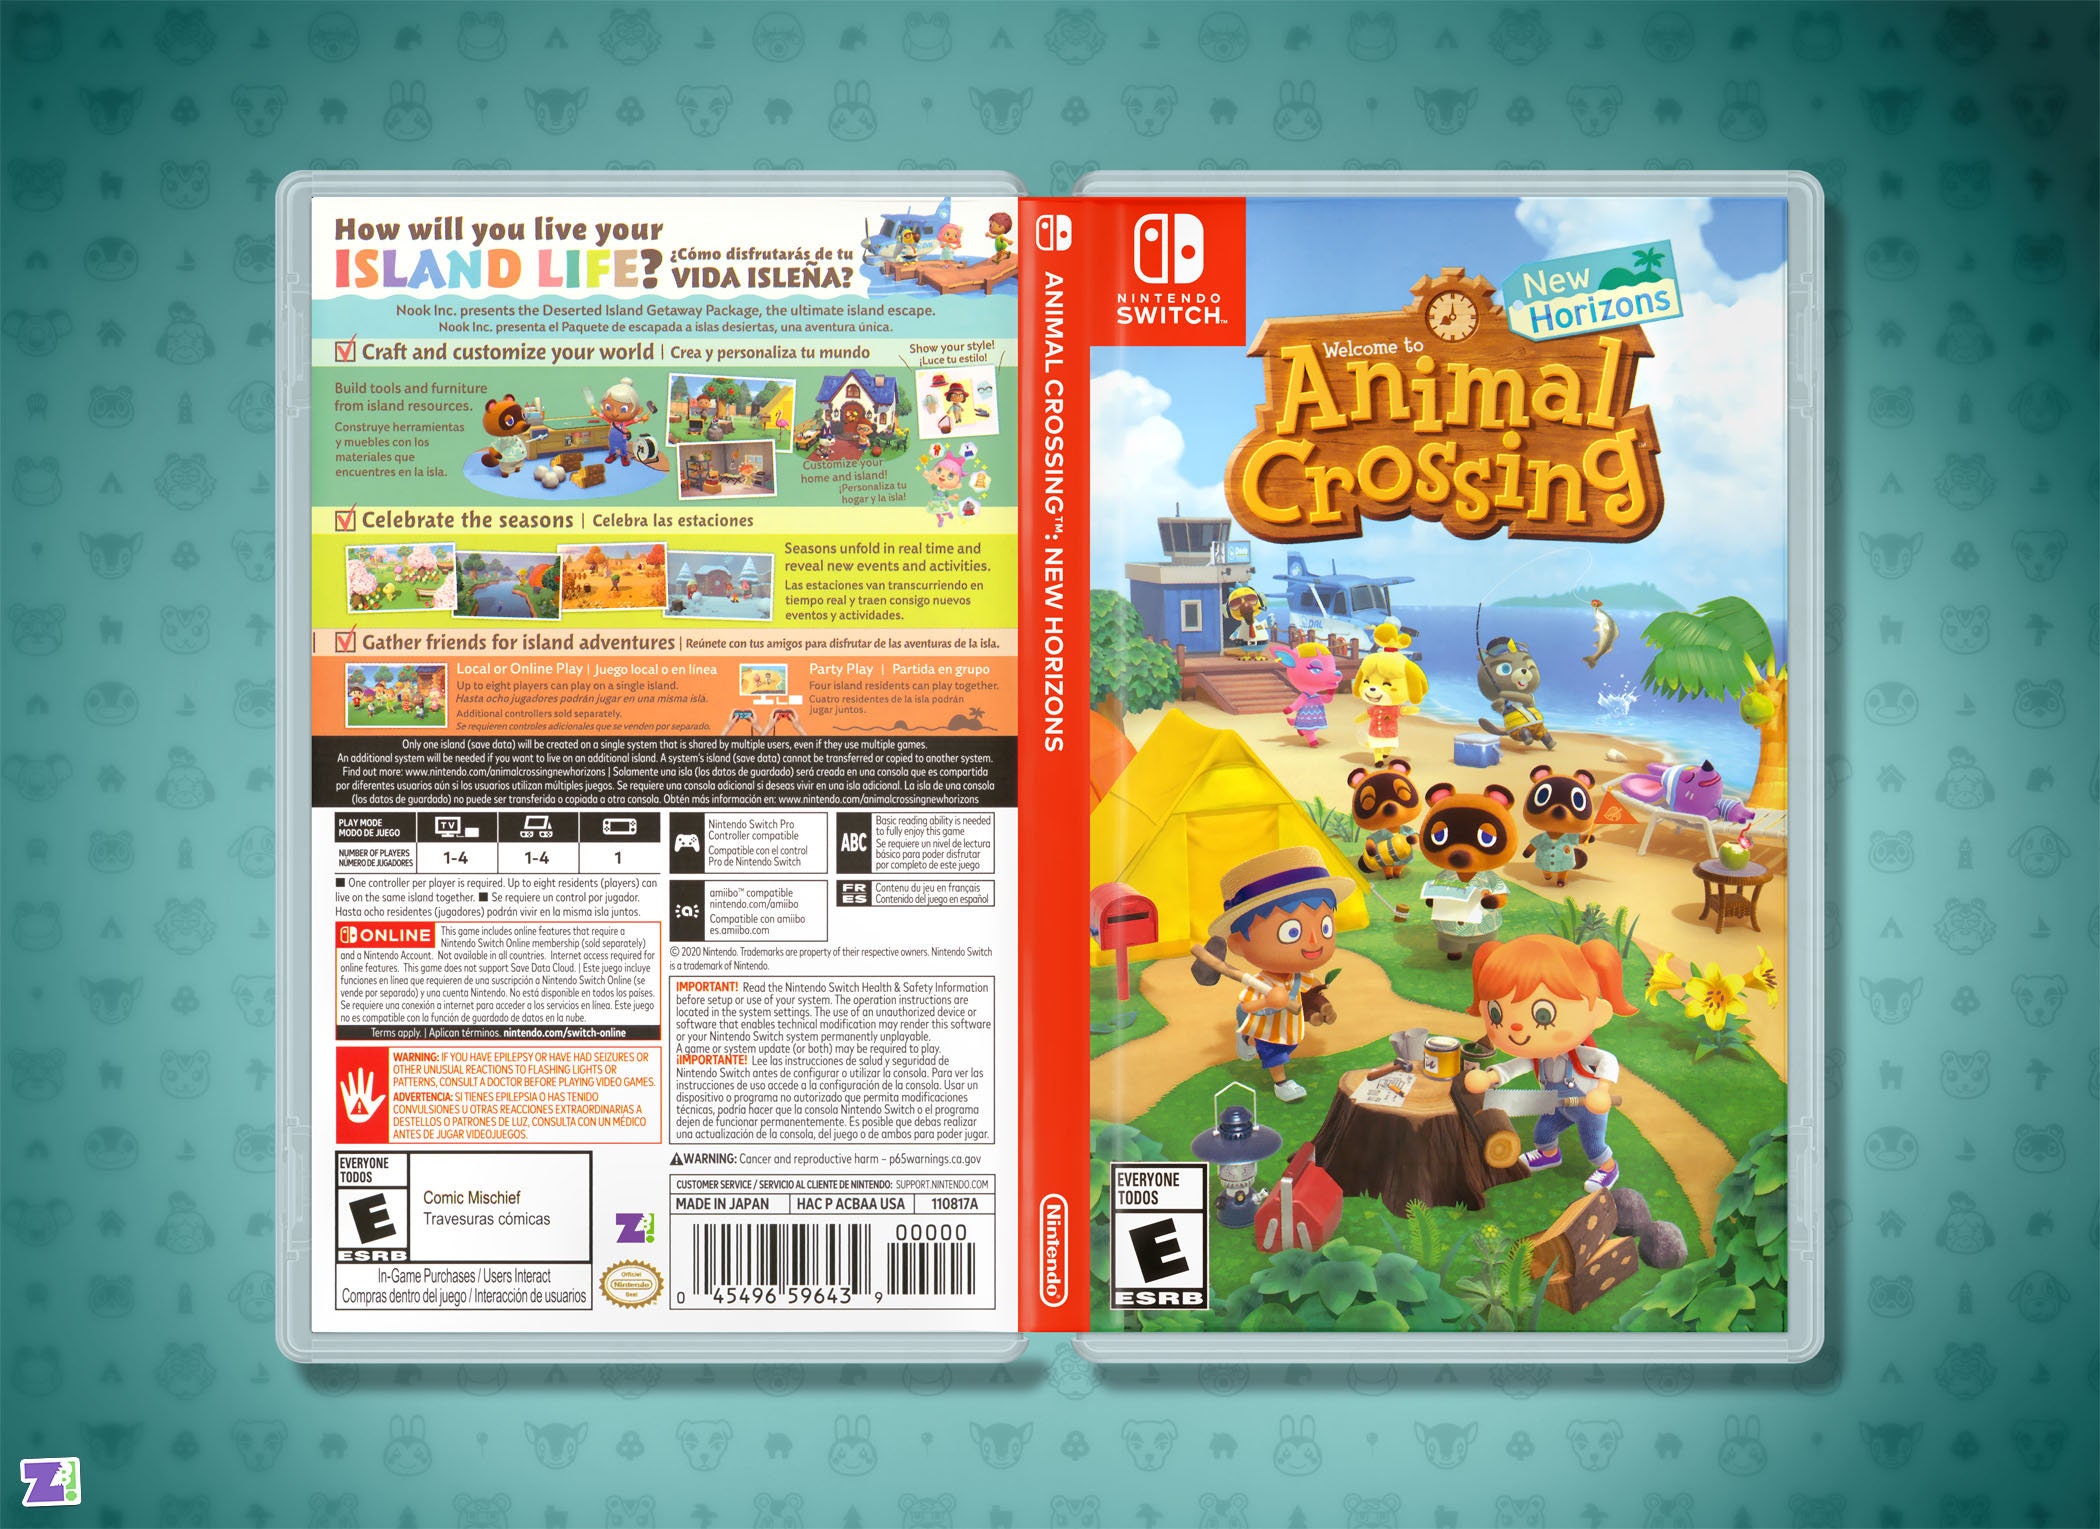 The Gorgeous Animal Crossing Switch Is Back In Stock At Nintendo's UK Store